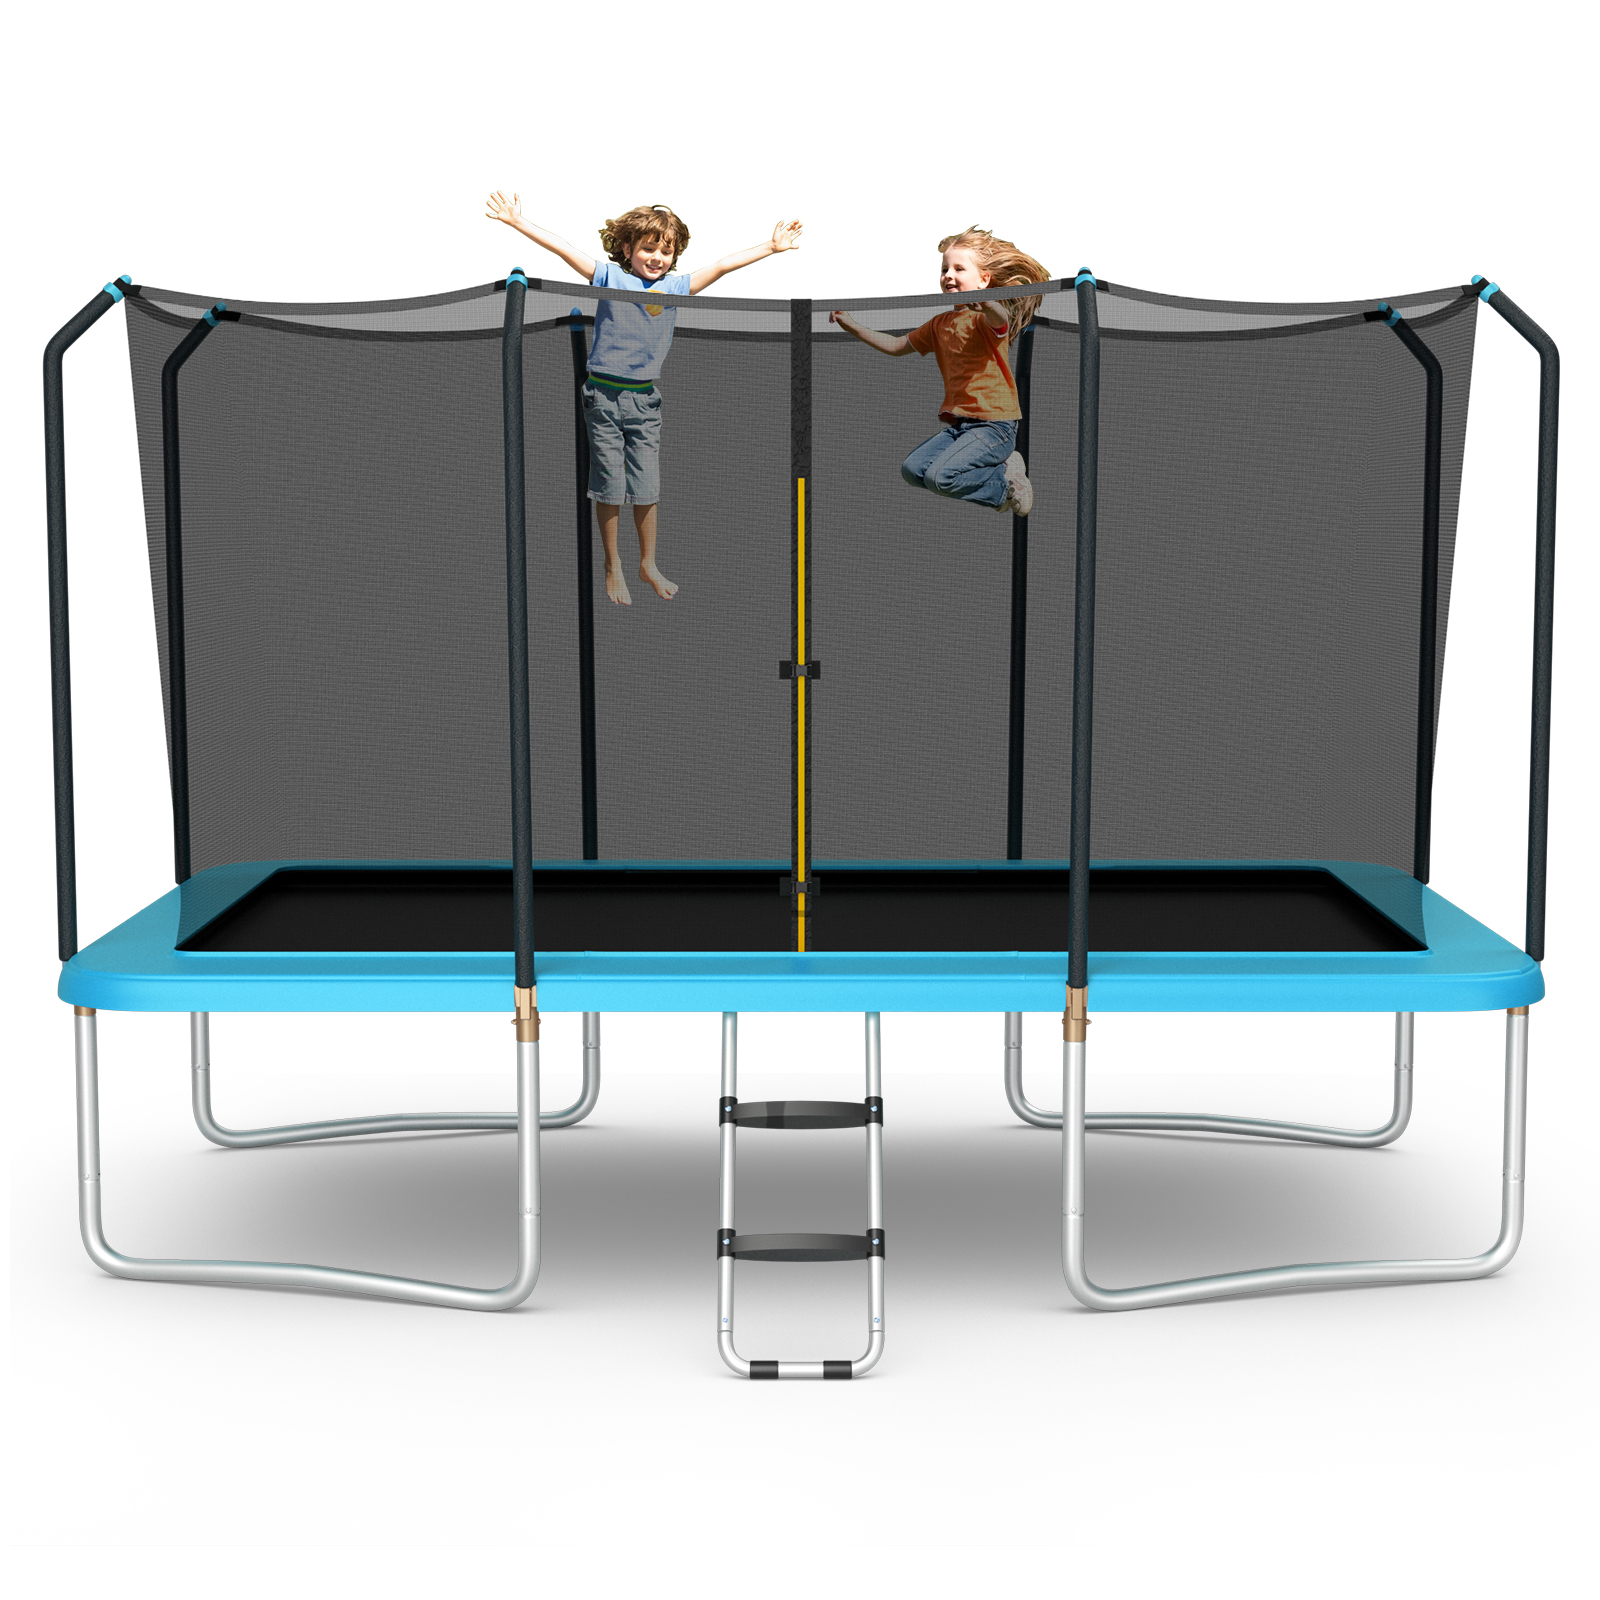 8 FT x 14 FT Rectangular Trampoline with Enclosure Net-Blue